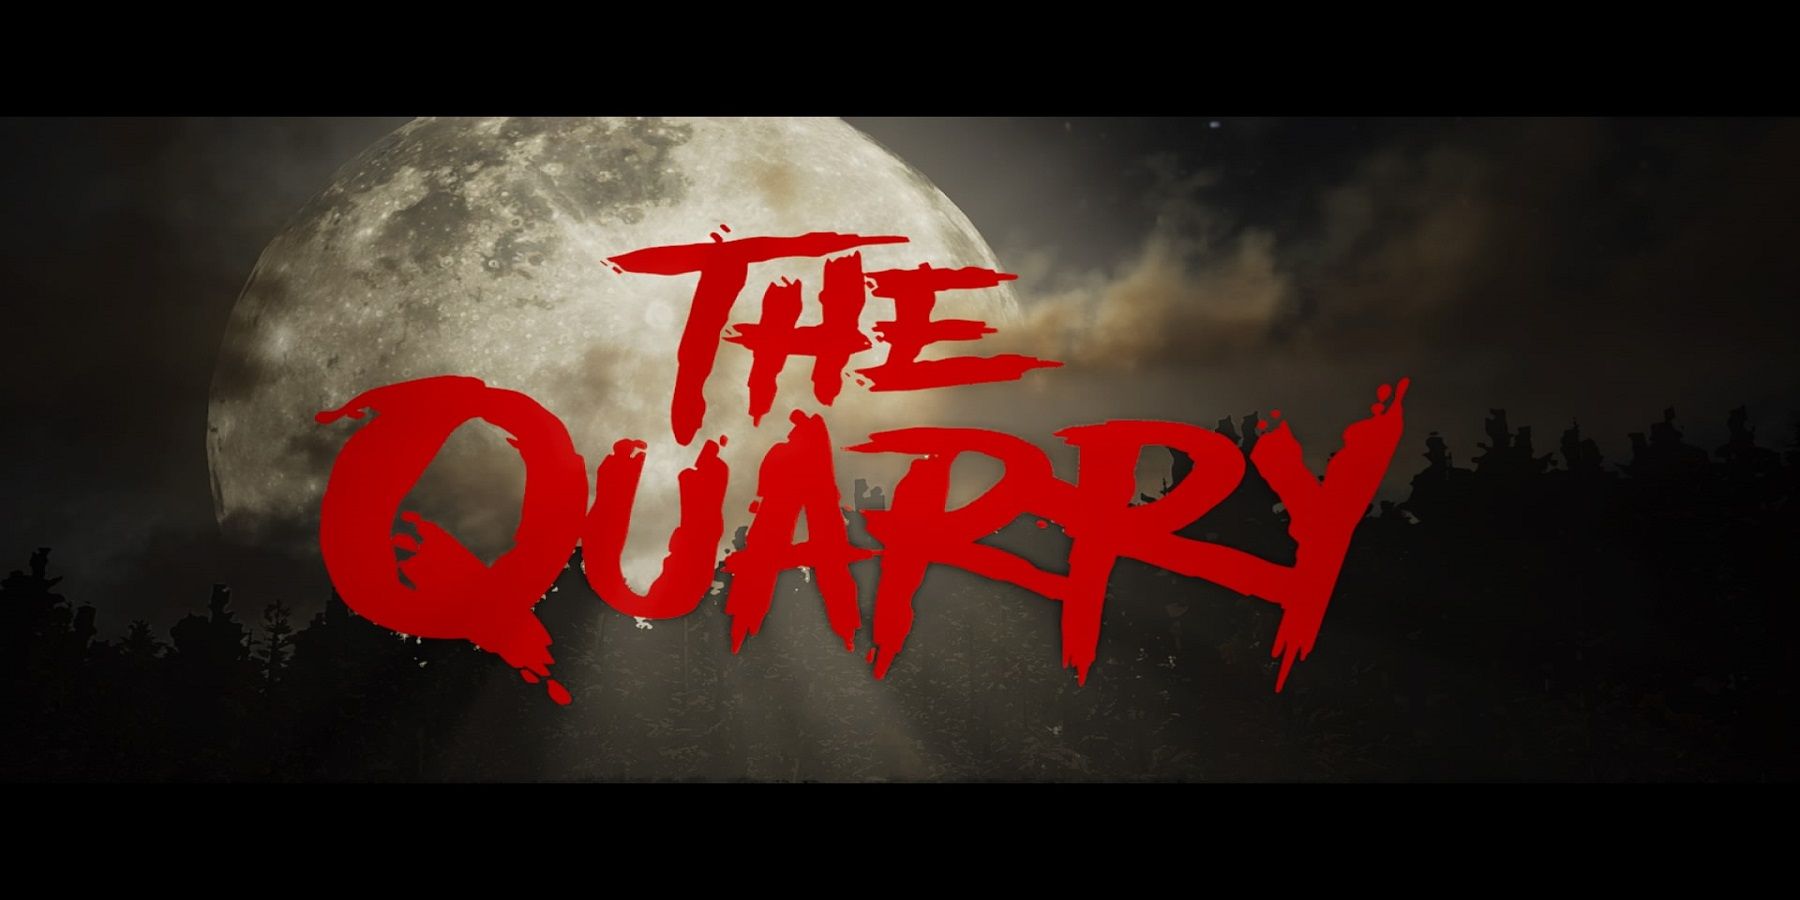 Complete Guide to The Quarry: Collectibles, Endings, and More